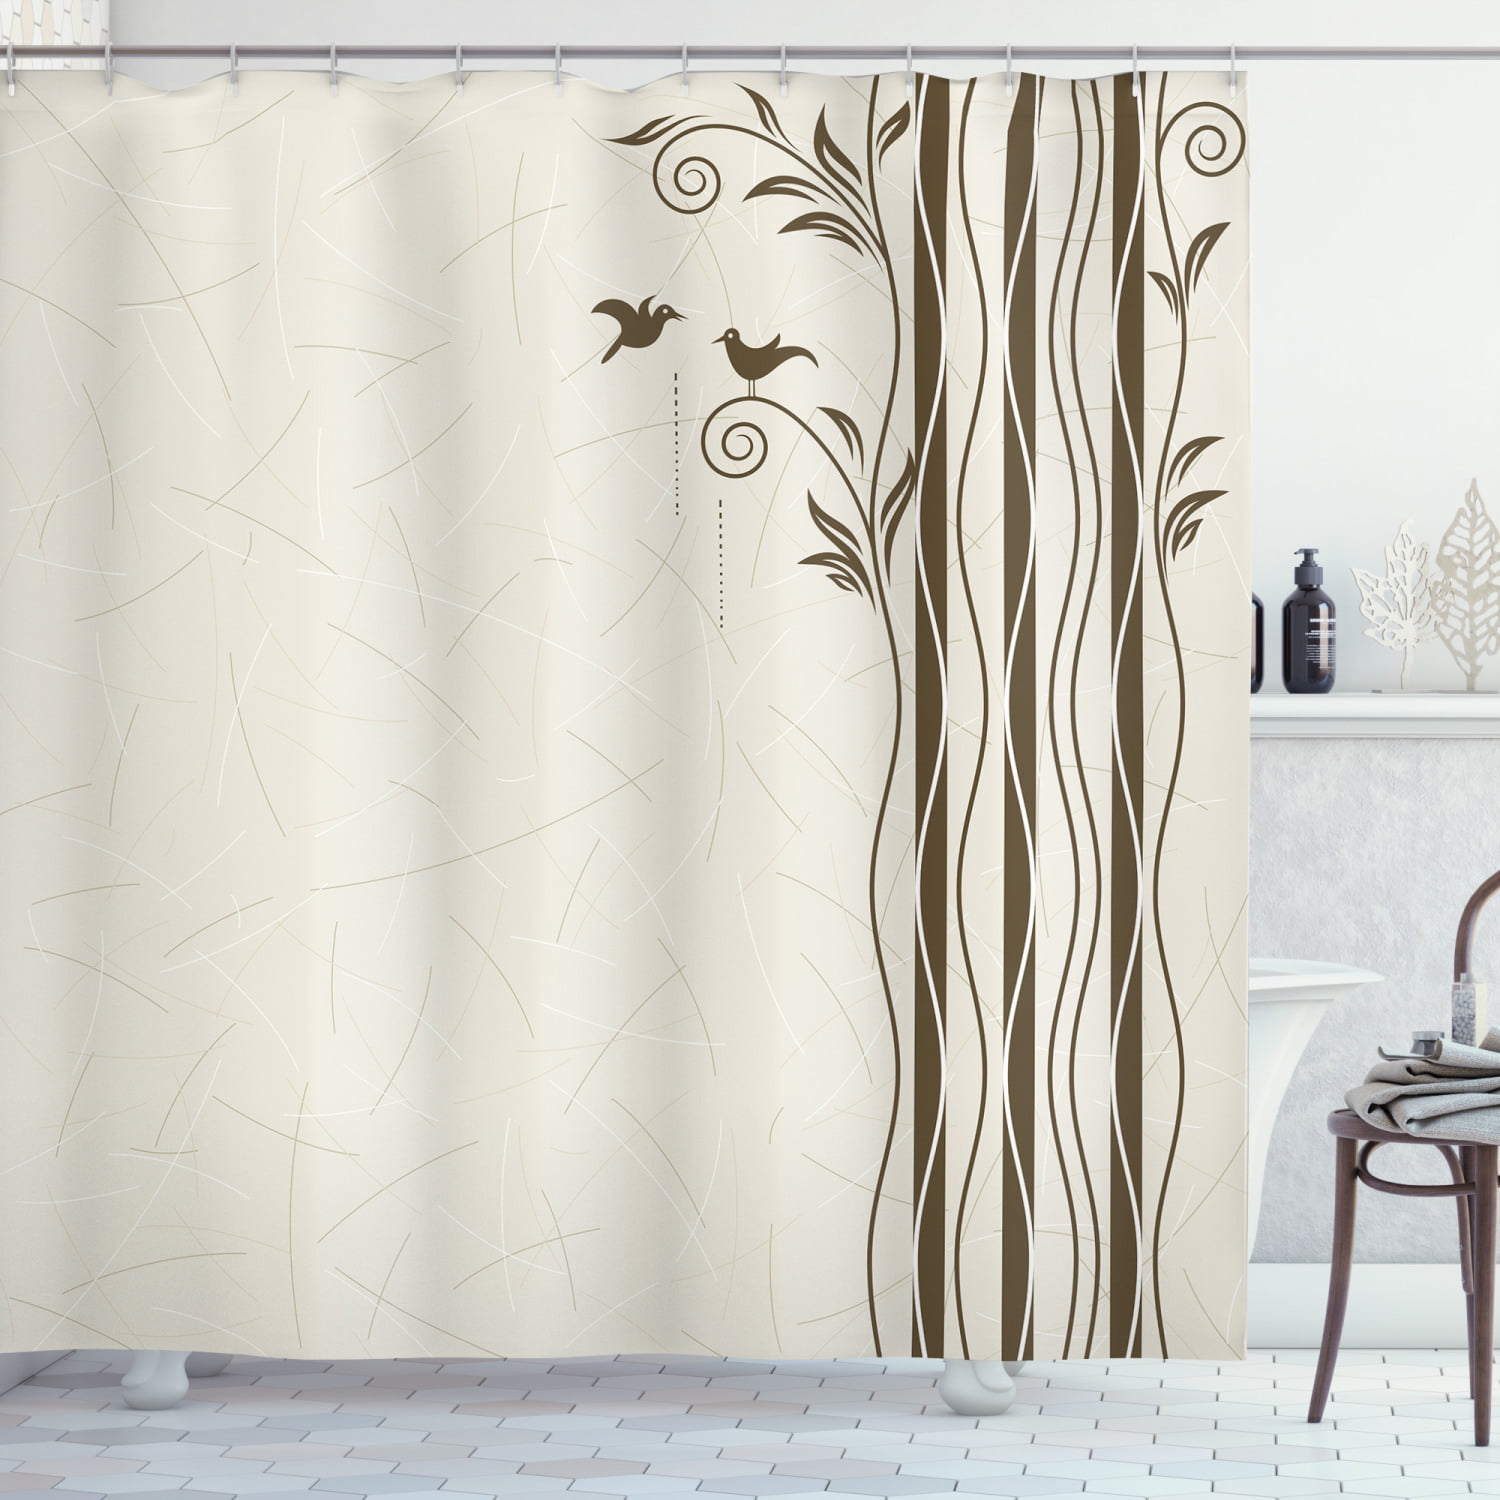 Spring Tree Branch with Leaves Shower Curtain Set Waterproof Polyester Fabric 